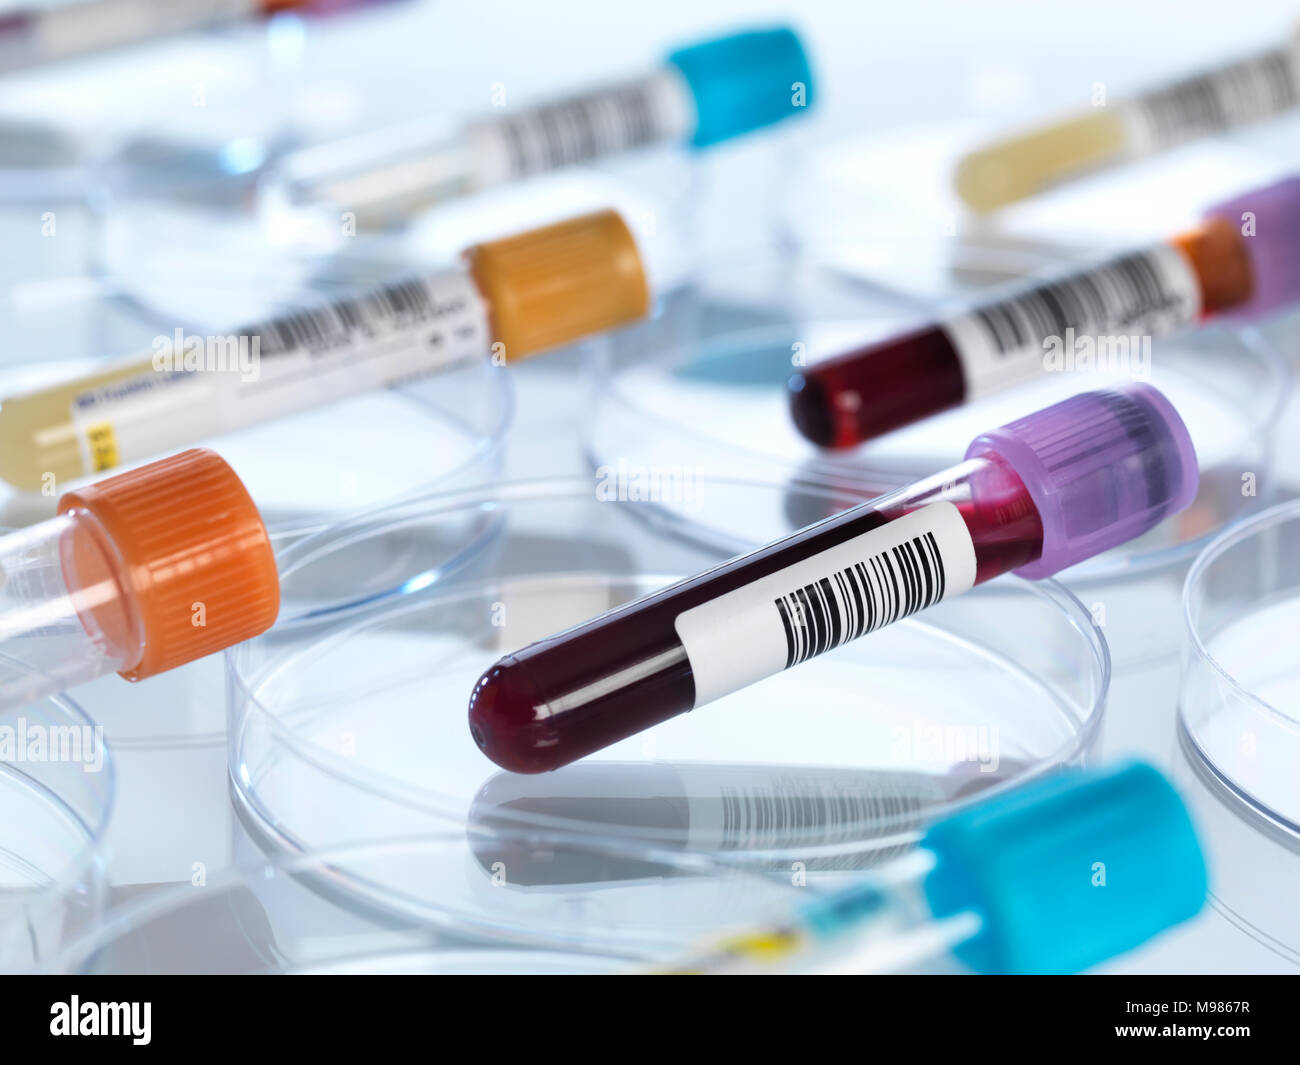 Human blood and other medical samples in petri dishes Stock Photo